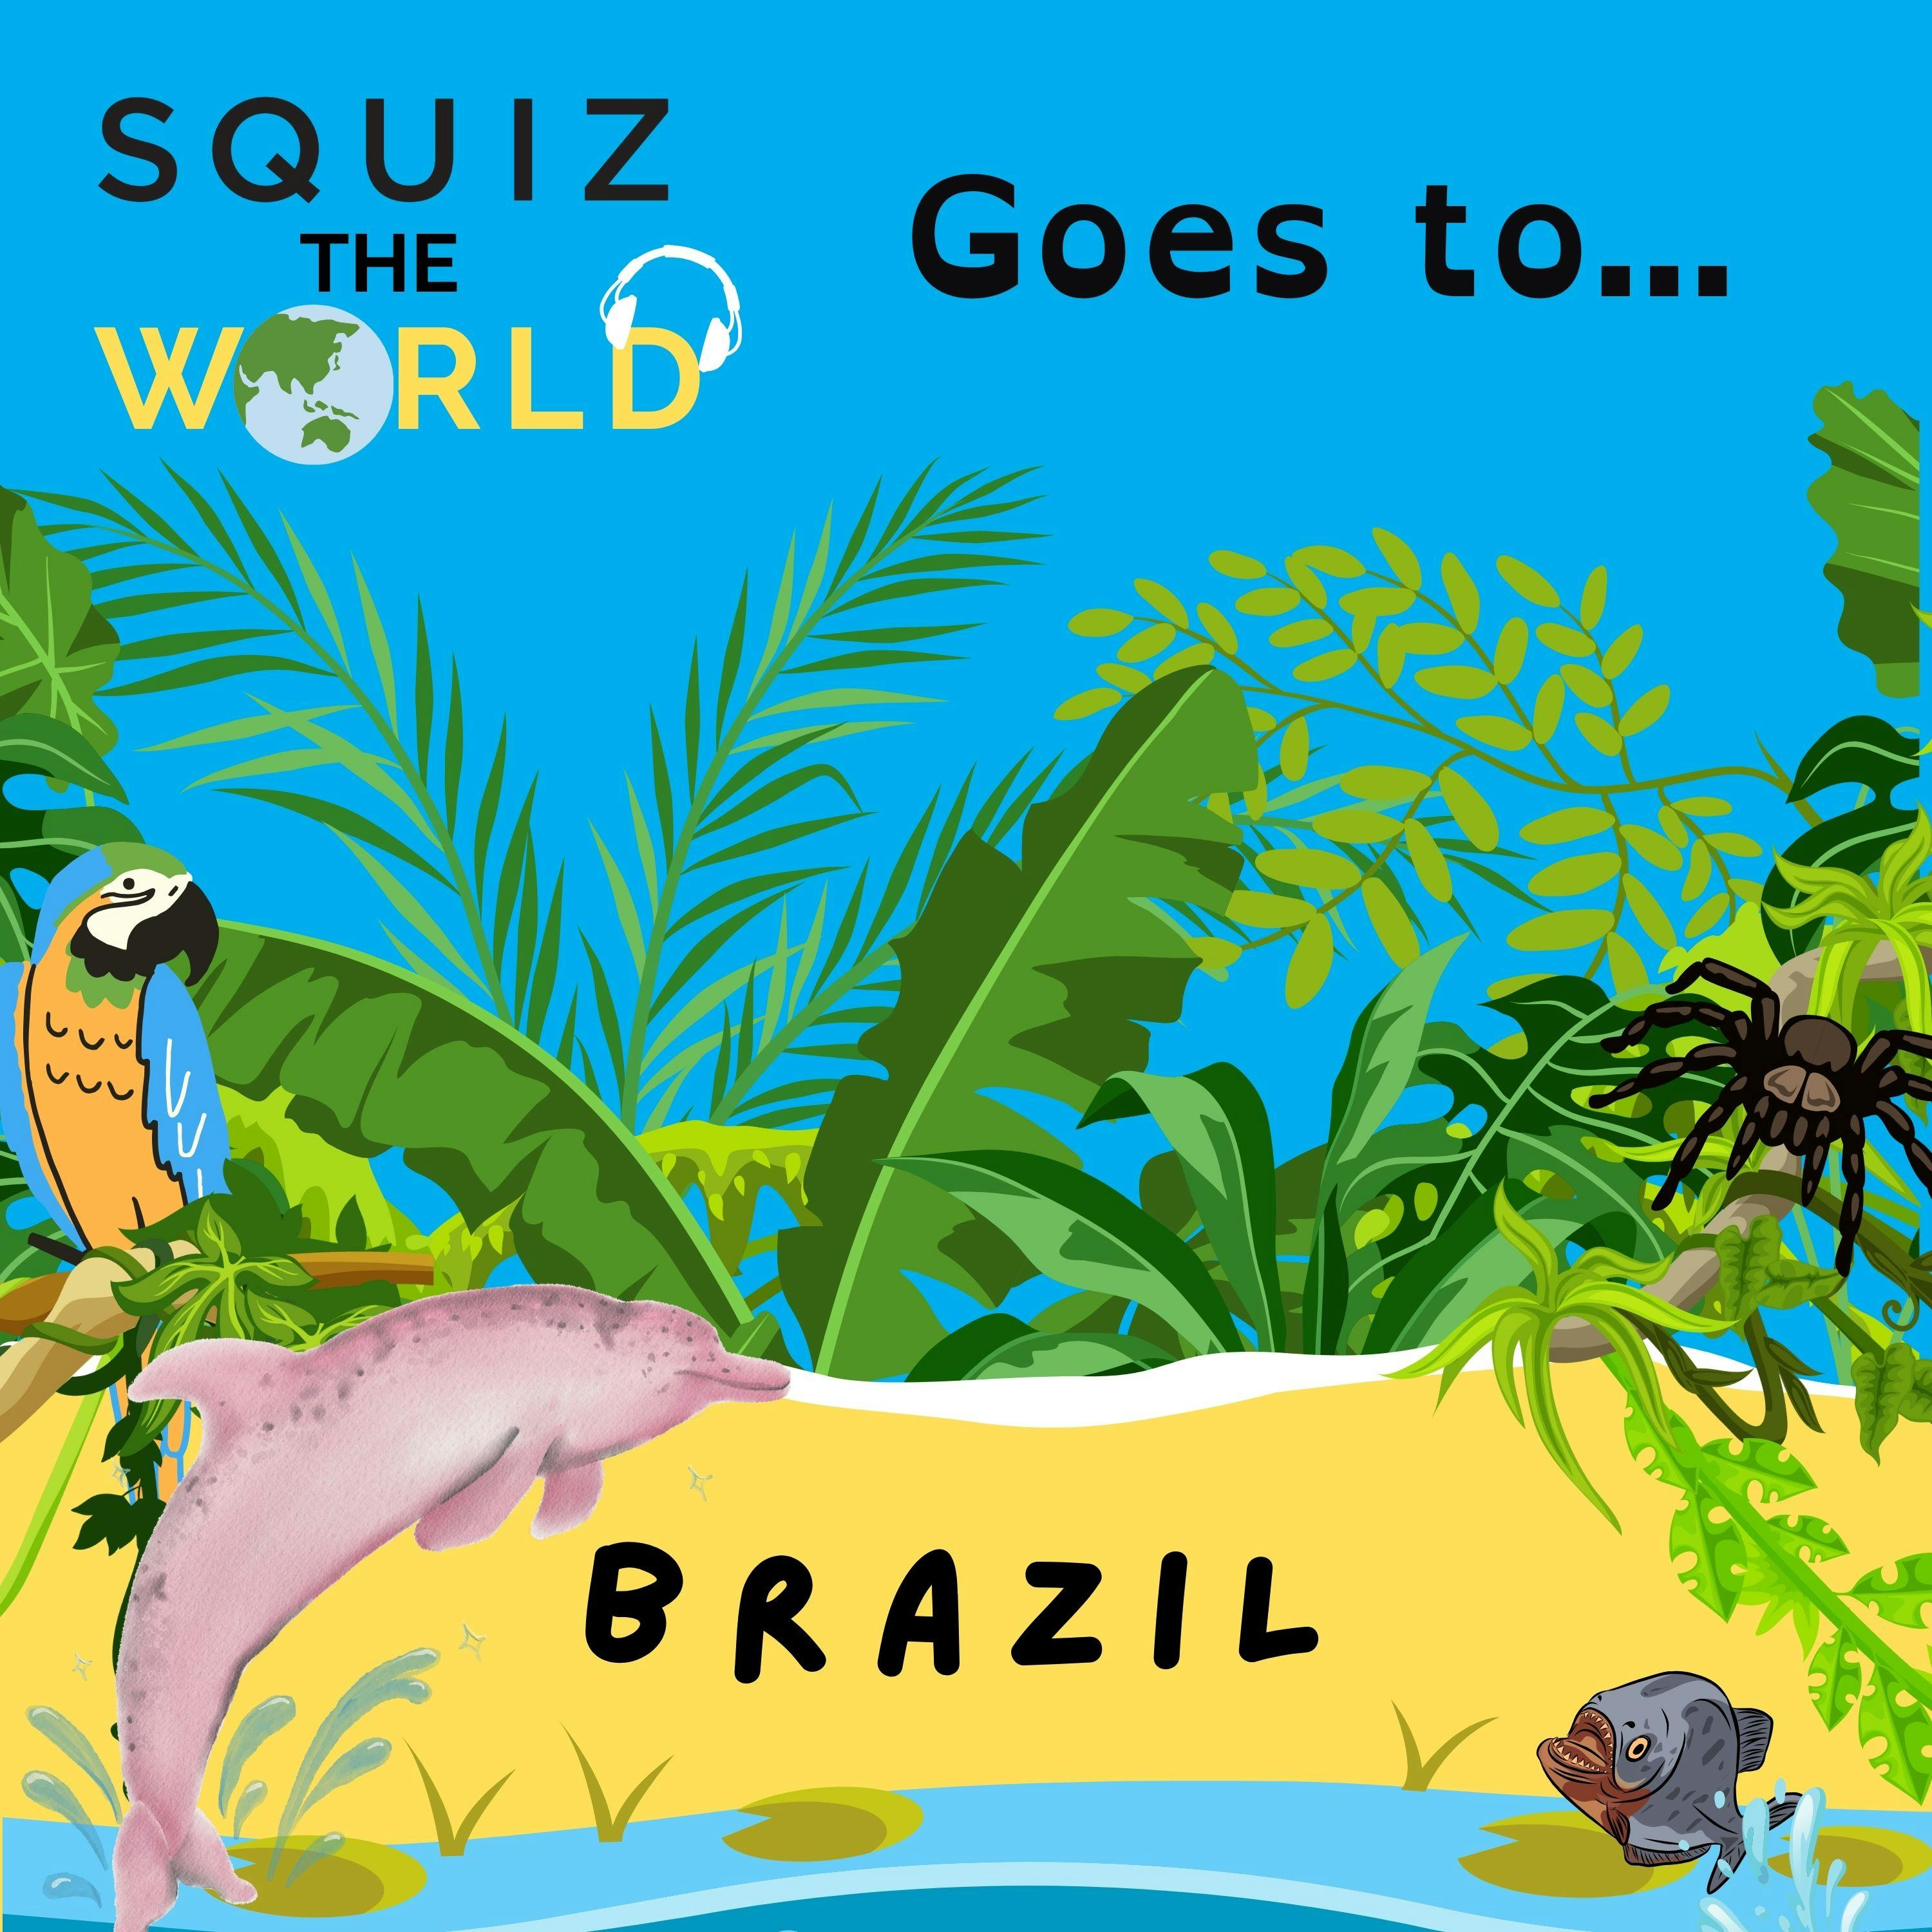 Squiz the World goes to... Brazil